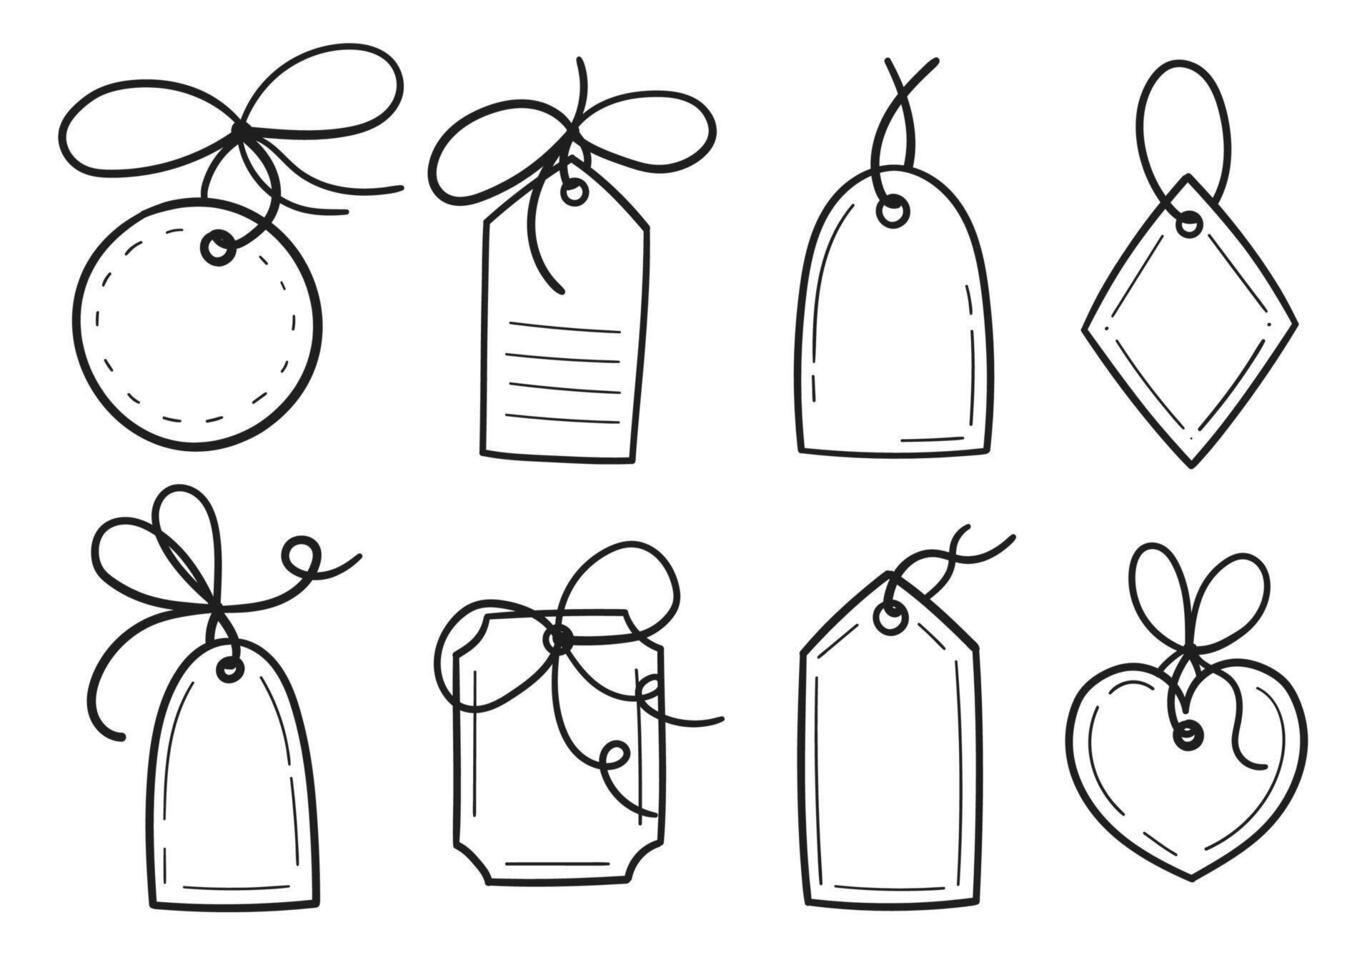 Hand drawn price tag label illustration icon vector doodle